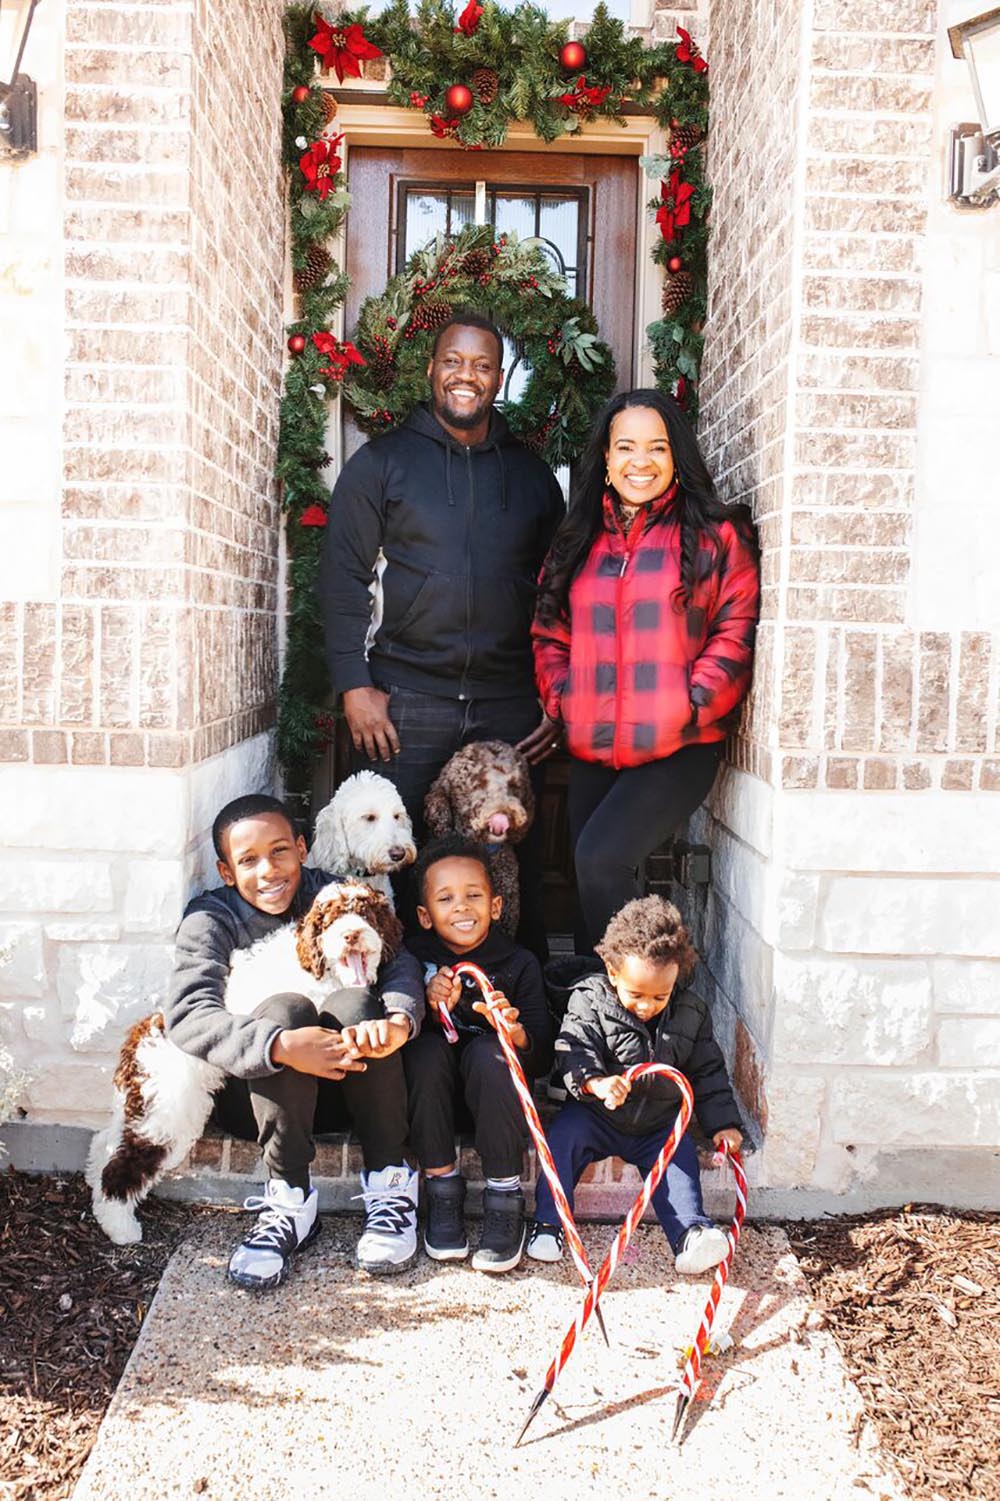 A man, woman, three children, and three dogs pose in front of a holiday decorated front door.